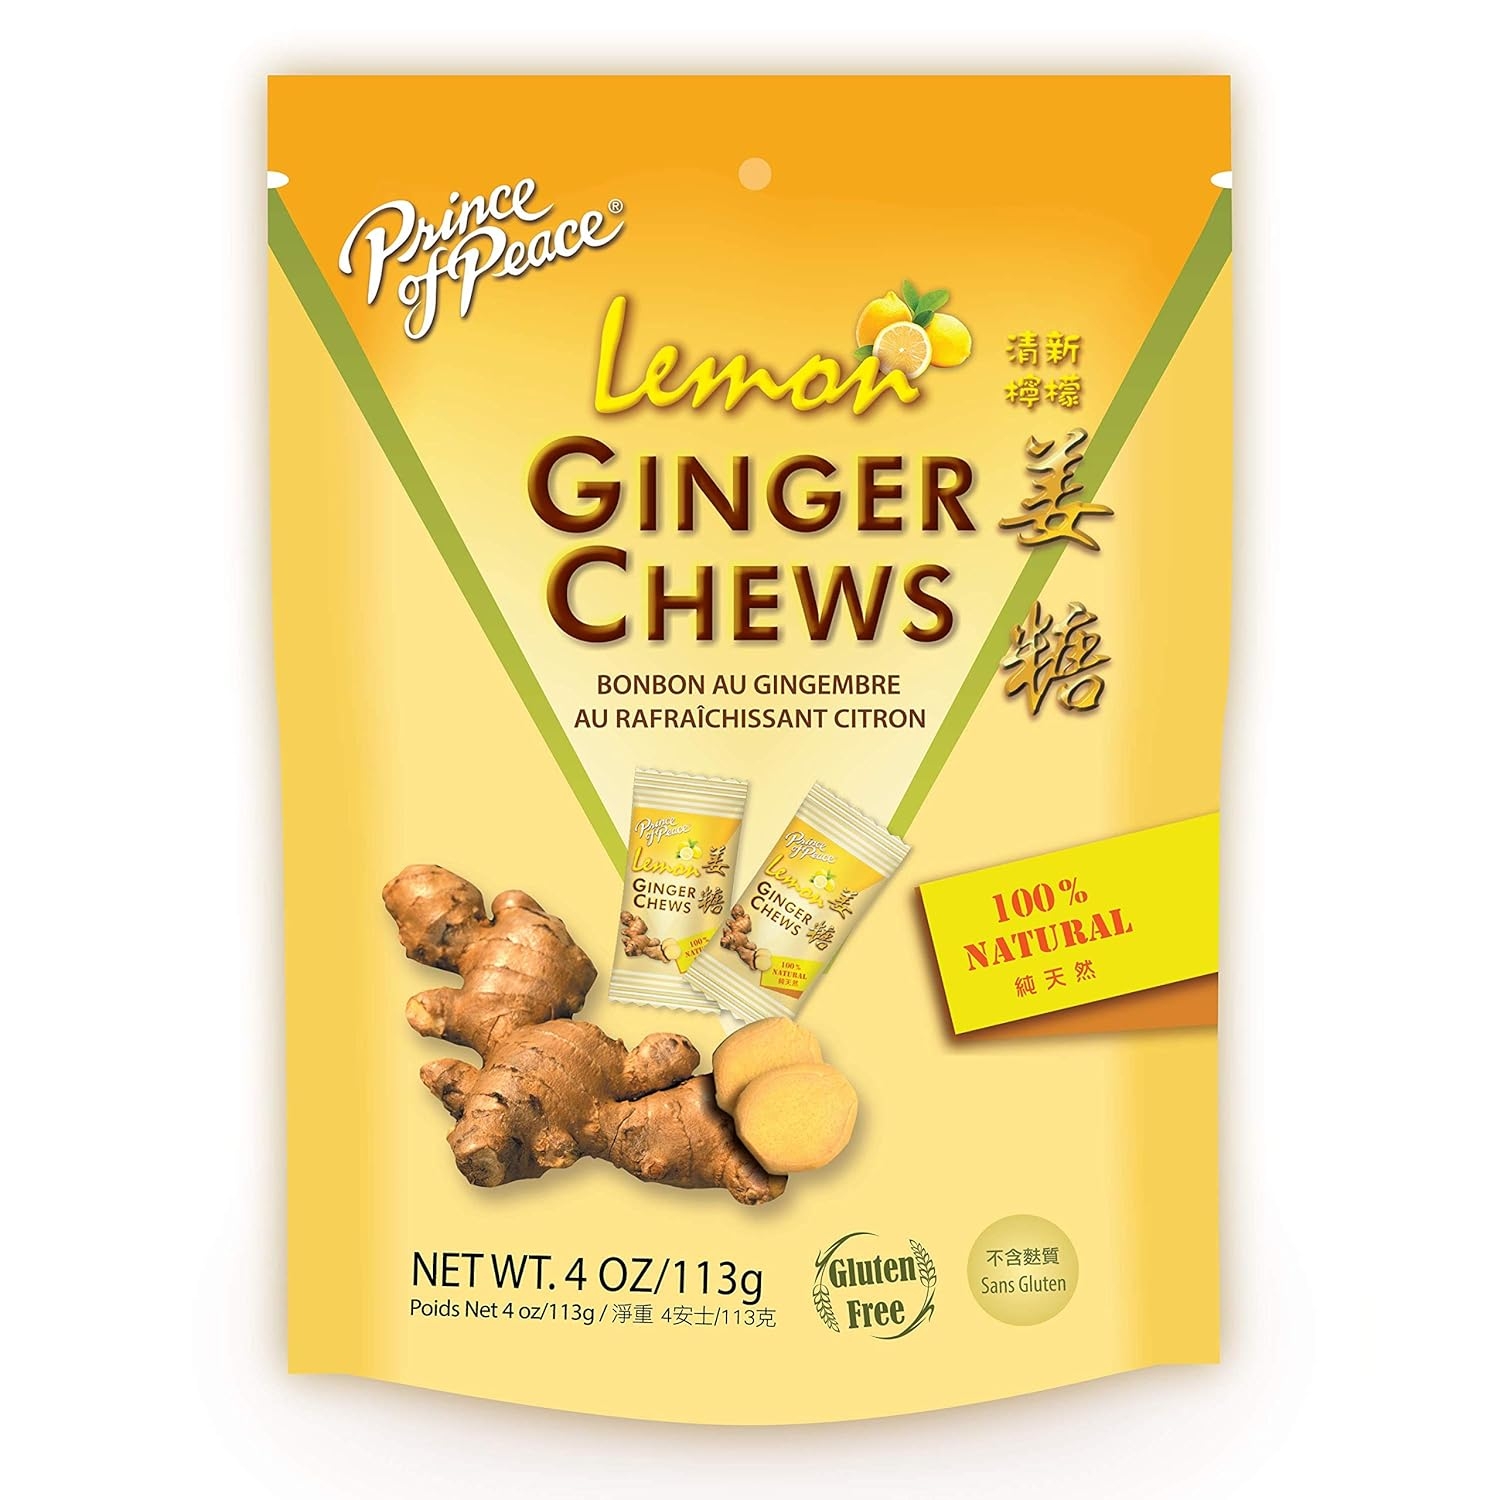 Prince of Peace Ginger Chews With Lemon, 4 oz. – Candied Ginger – Lemon Candy – Lemon Ginger Chews – Natural Candy – Ginger Candy for Nausea